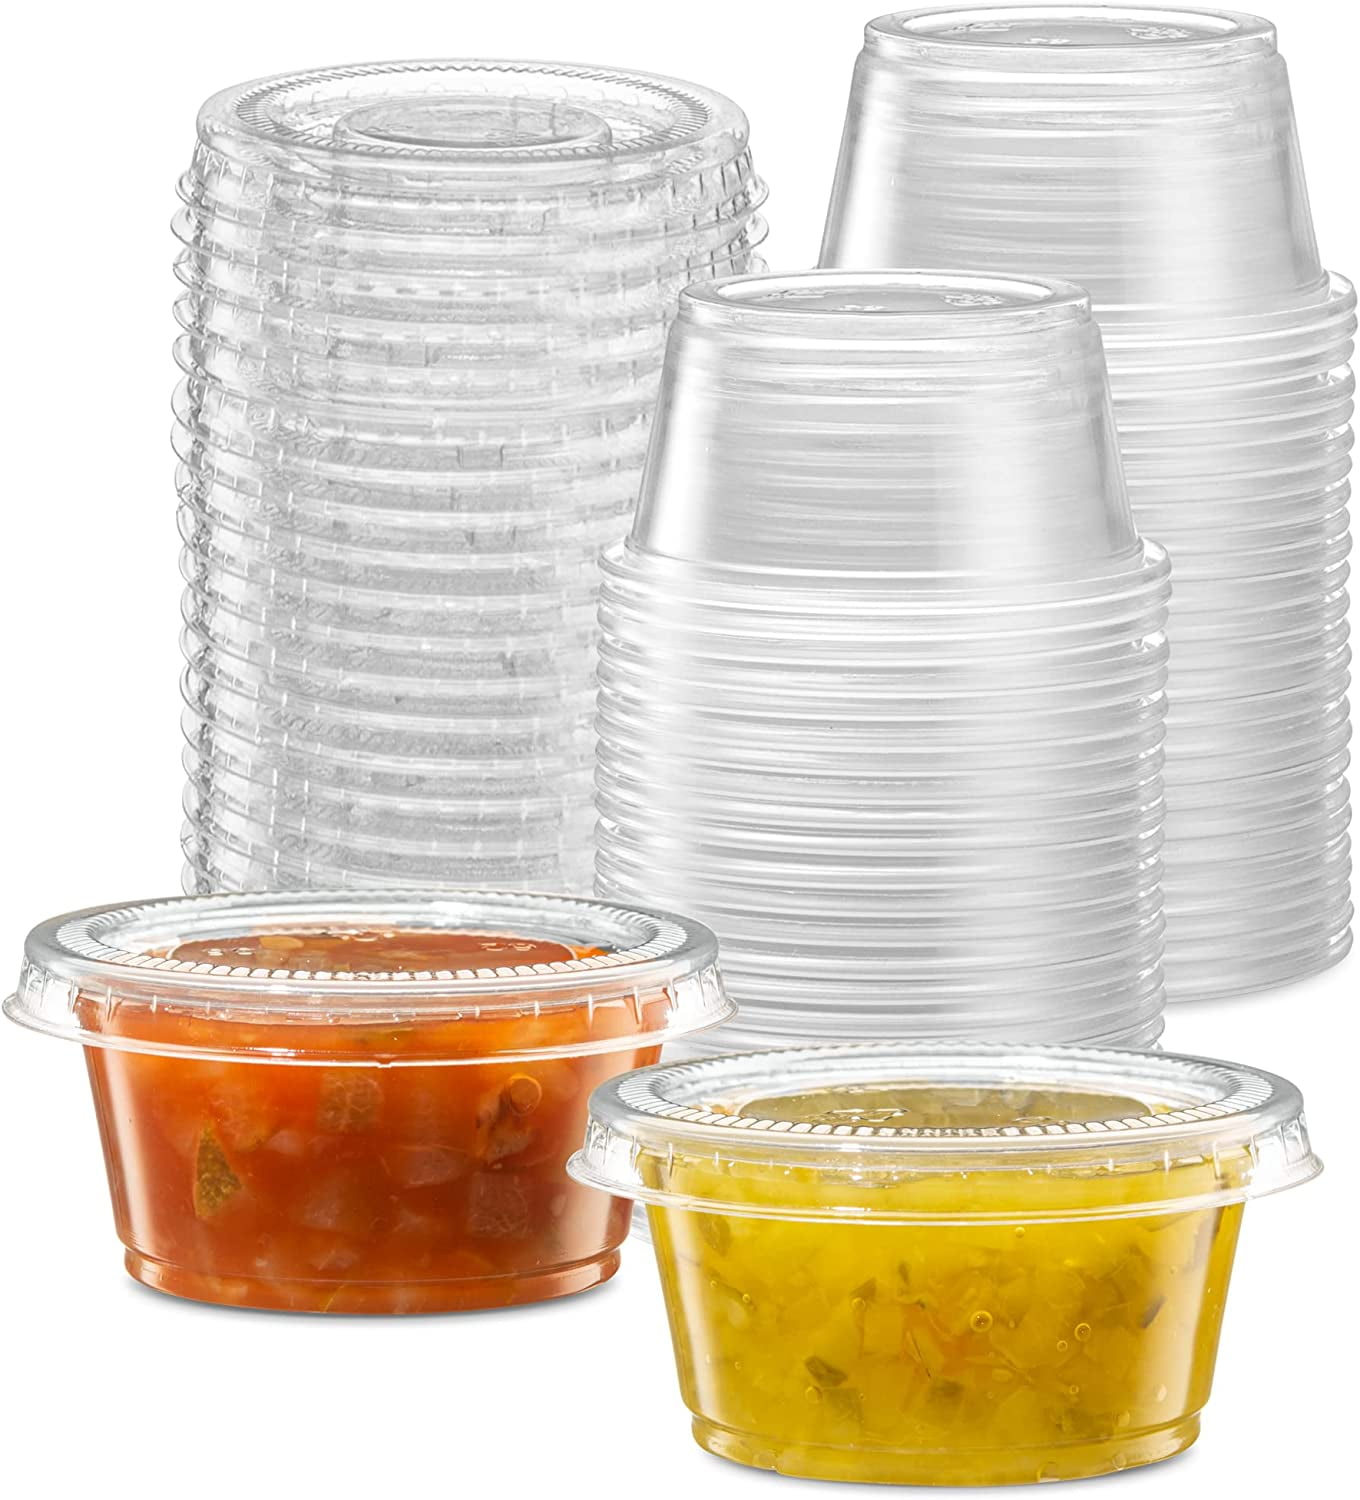 PAMI Portion Control Cups With Lids 4oz, 100-Pack- Small Meal Prep Plastic Food  Containers- BPA-Free Disposable Ramekin Cups- Deli Containers For  Condiments, Sauces, Salsas, Dips, Jello Shots 100 4oz